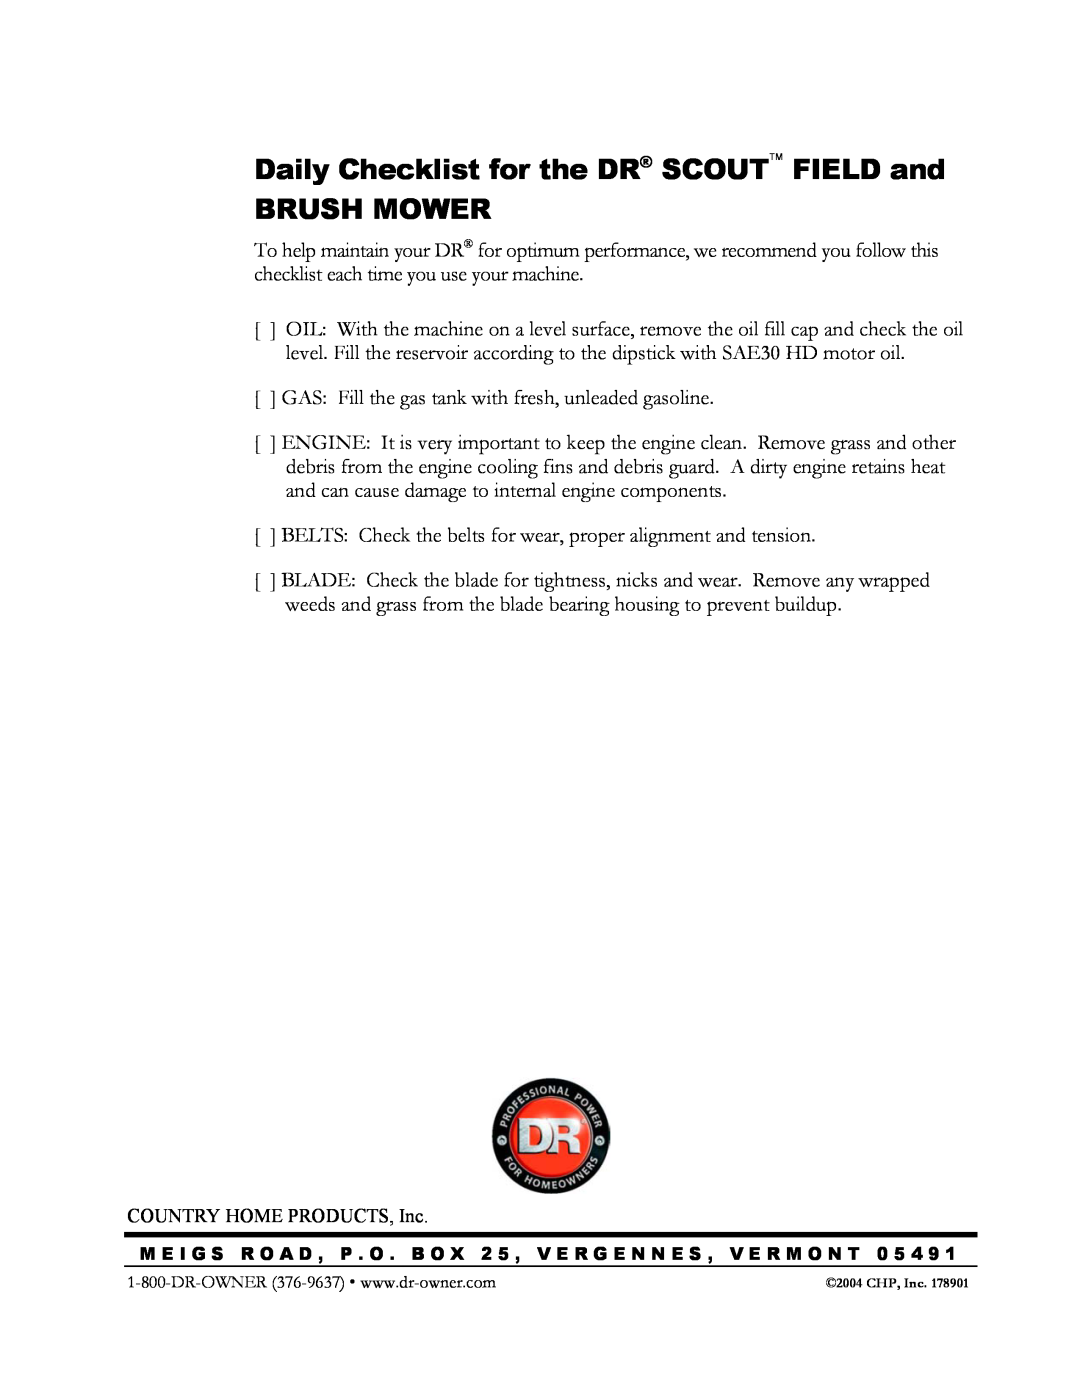 Country Home Products DR SCOUT FIELD and BRUSH MOWER manual Daily Checklist for the DR SCOUT FIELD and BRUSH MOWER 